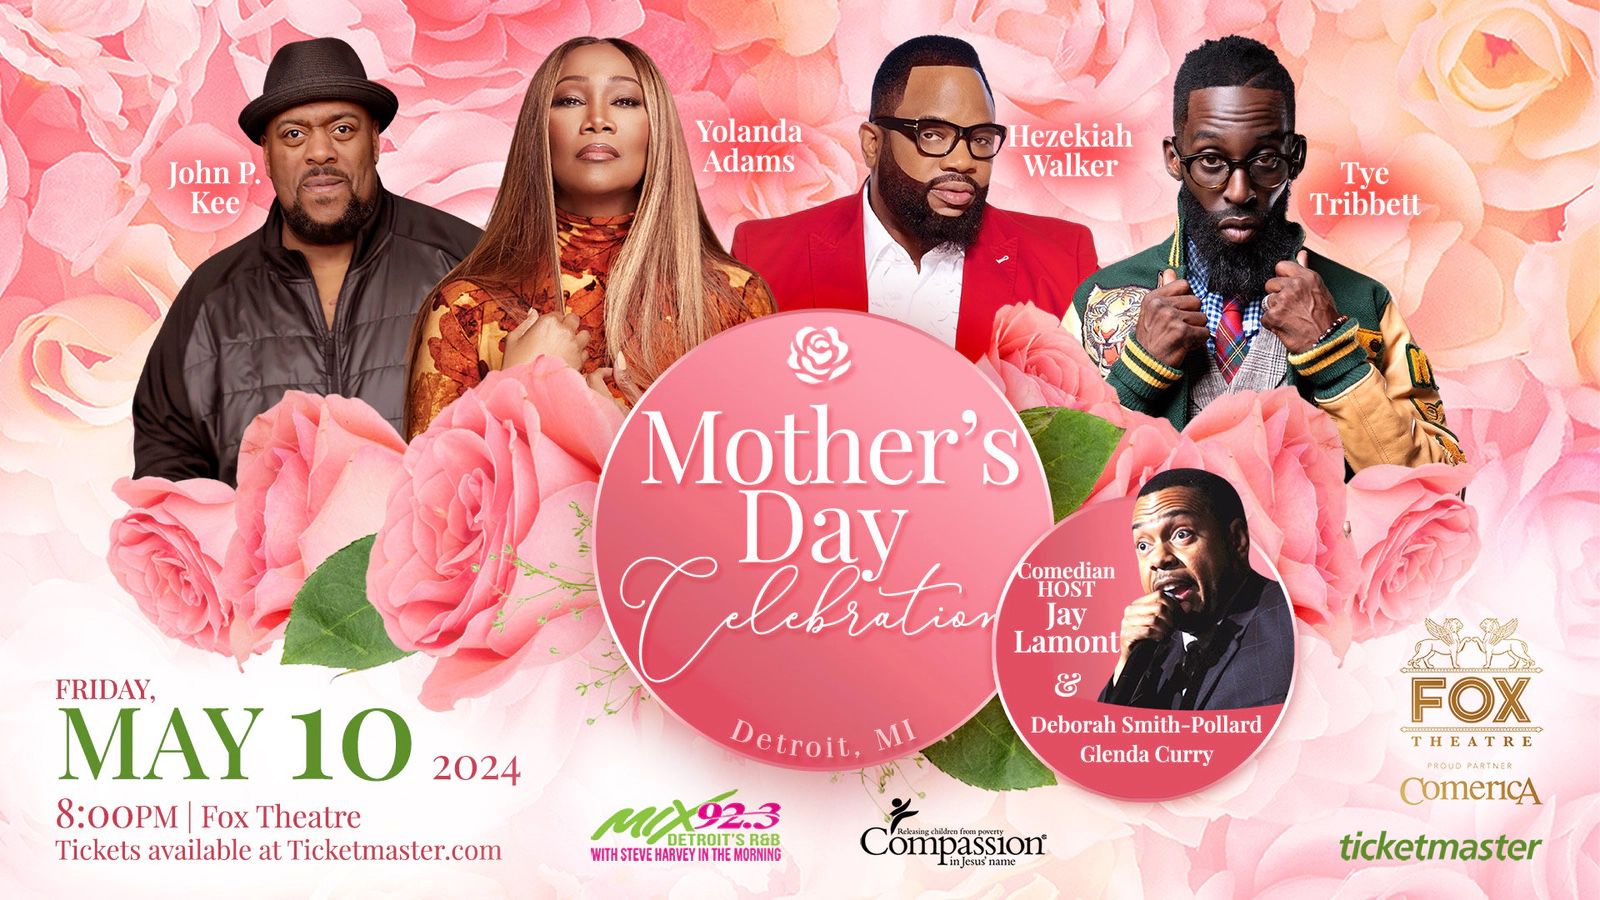 Mother's Day Concert With Yolanda Adams, Hezekiah Walker, John P. Kee and Tye Tribbett and hosted by Jay Lamont on May 10th at the Fox Theatr